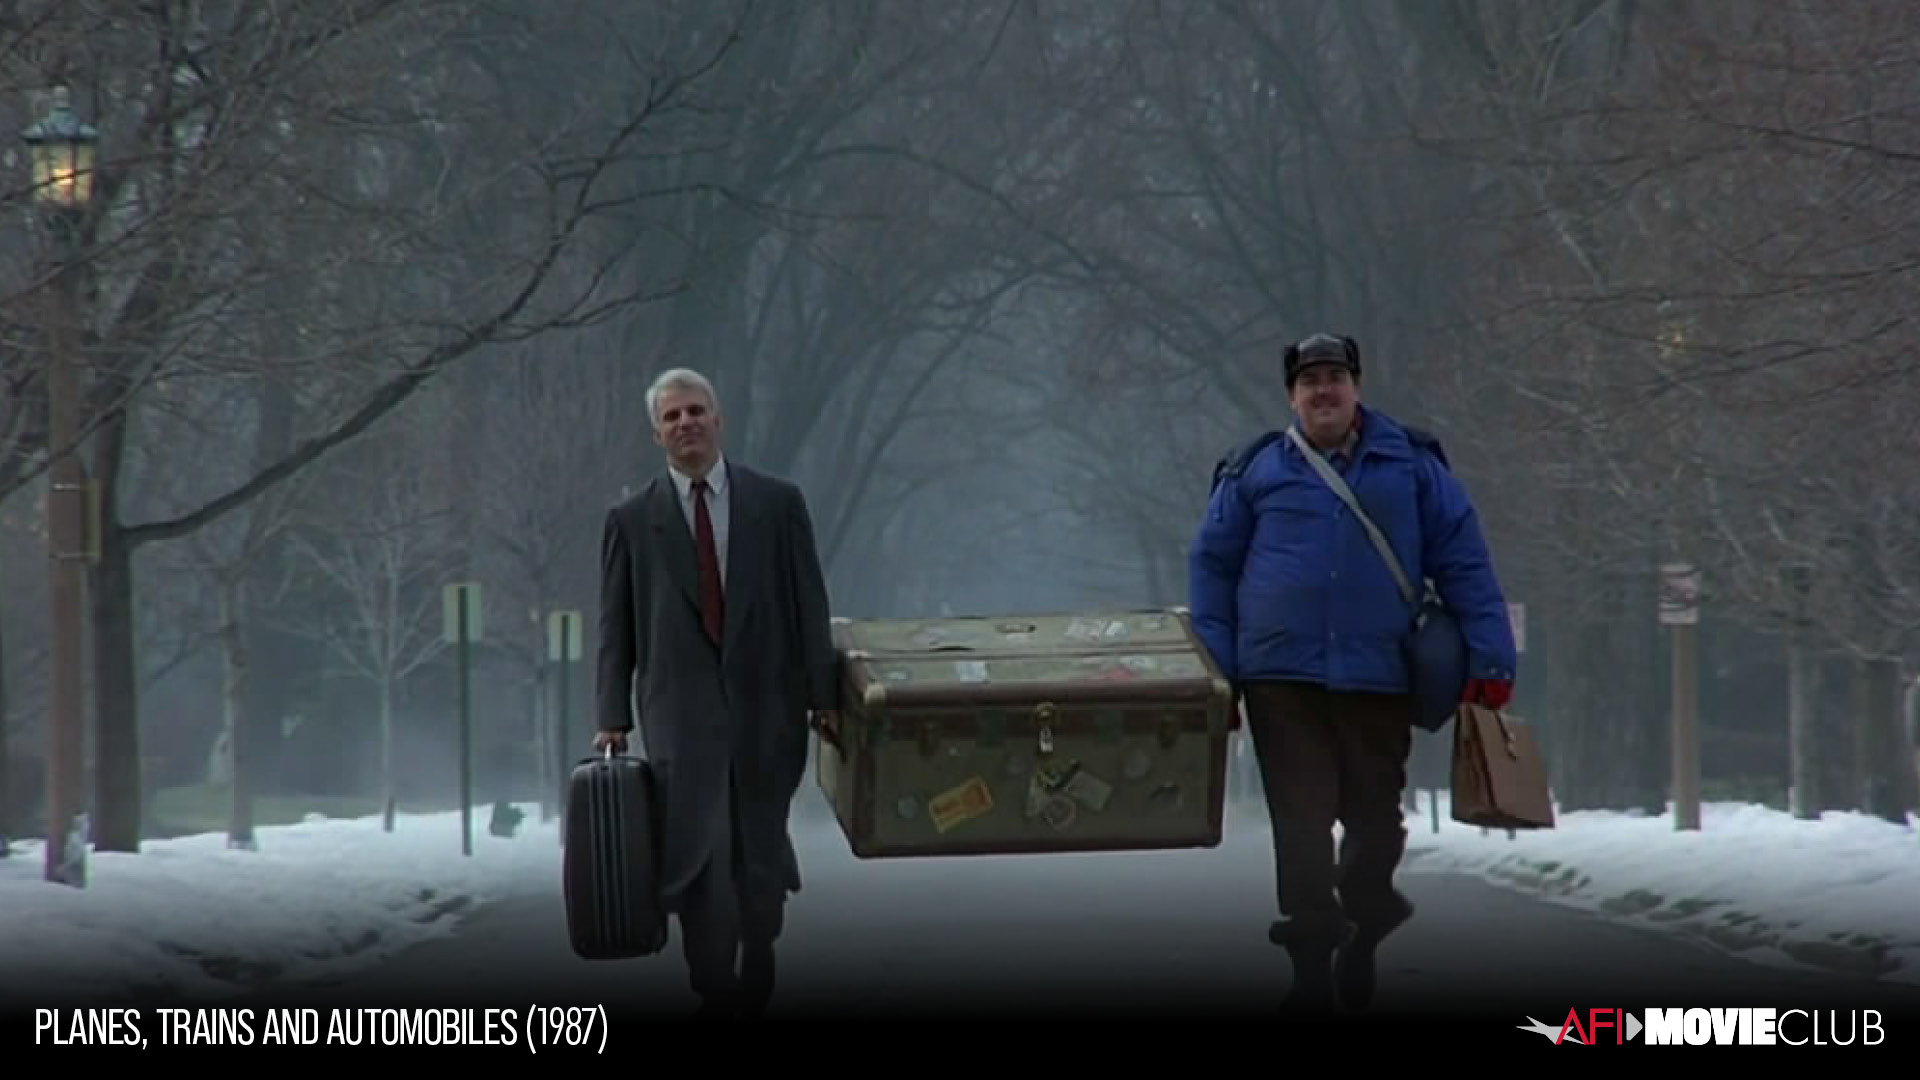 Planes, Trains, and Automobiles Film Still - Steve Martin and John Candy